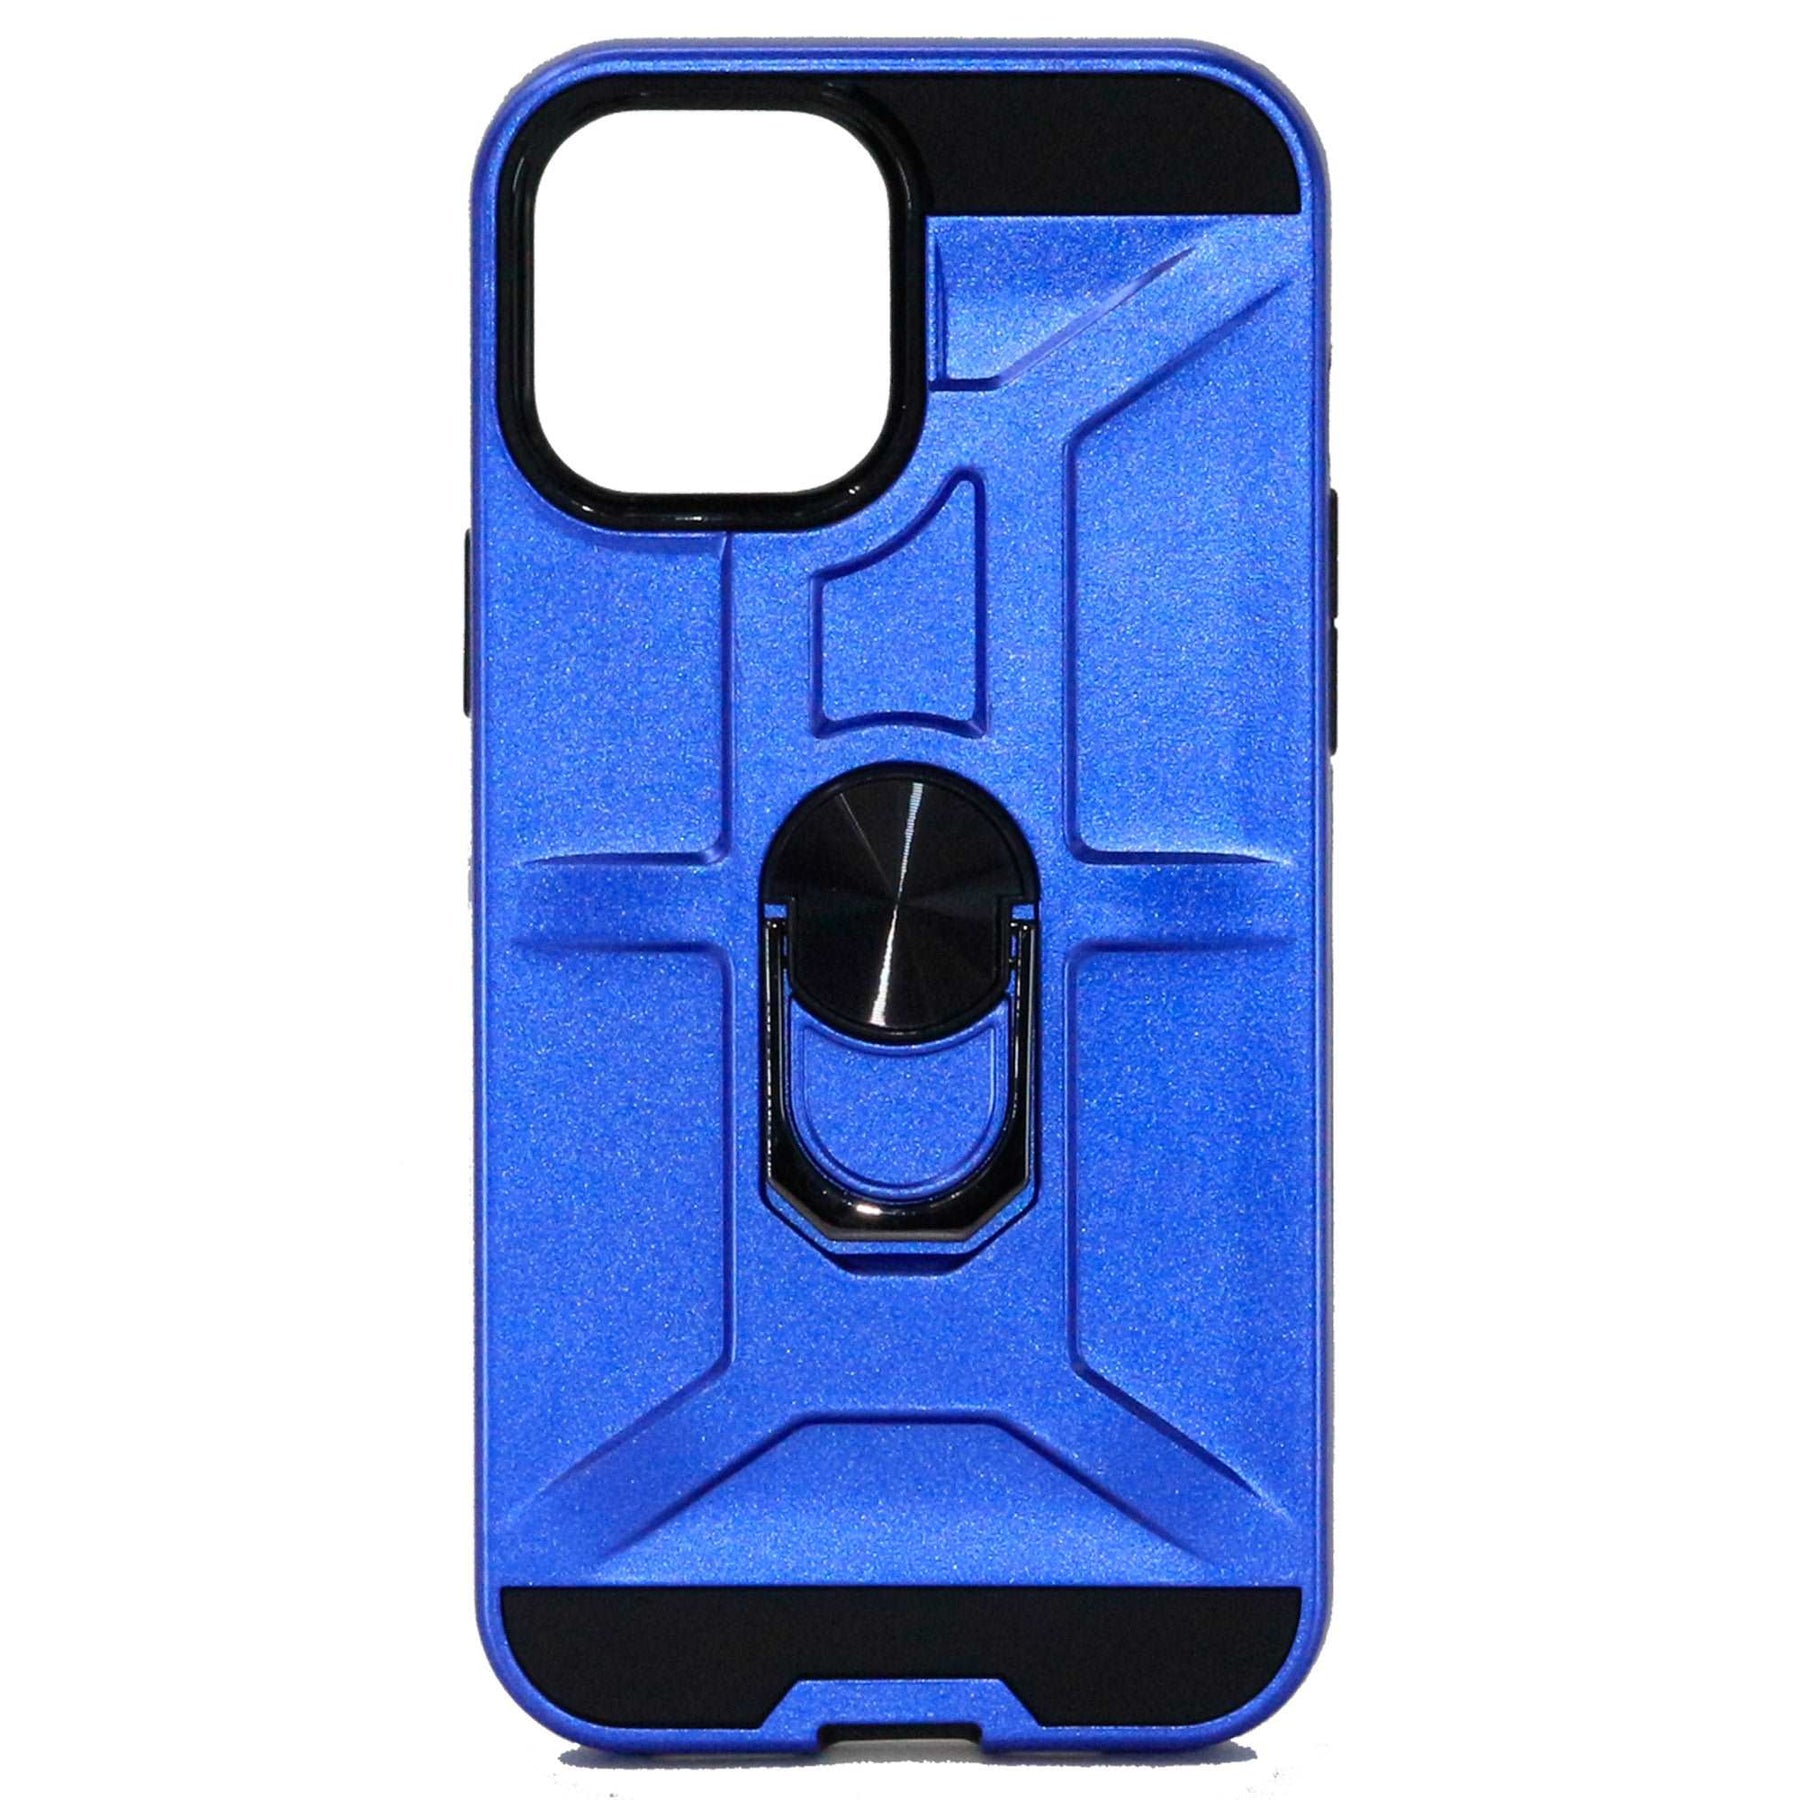 iphone 12 blue ring case